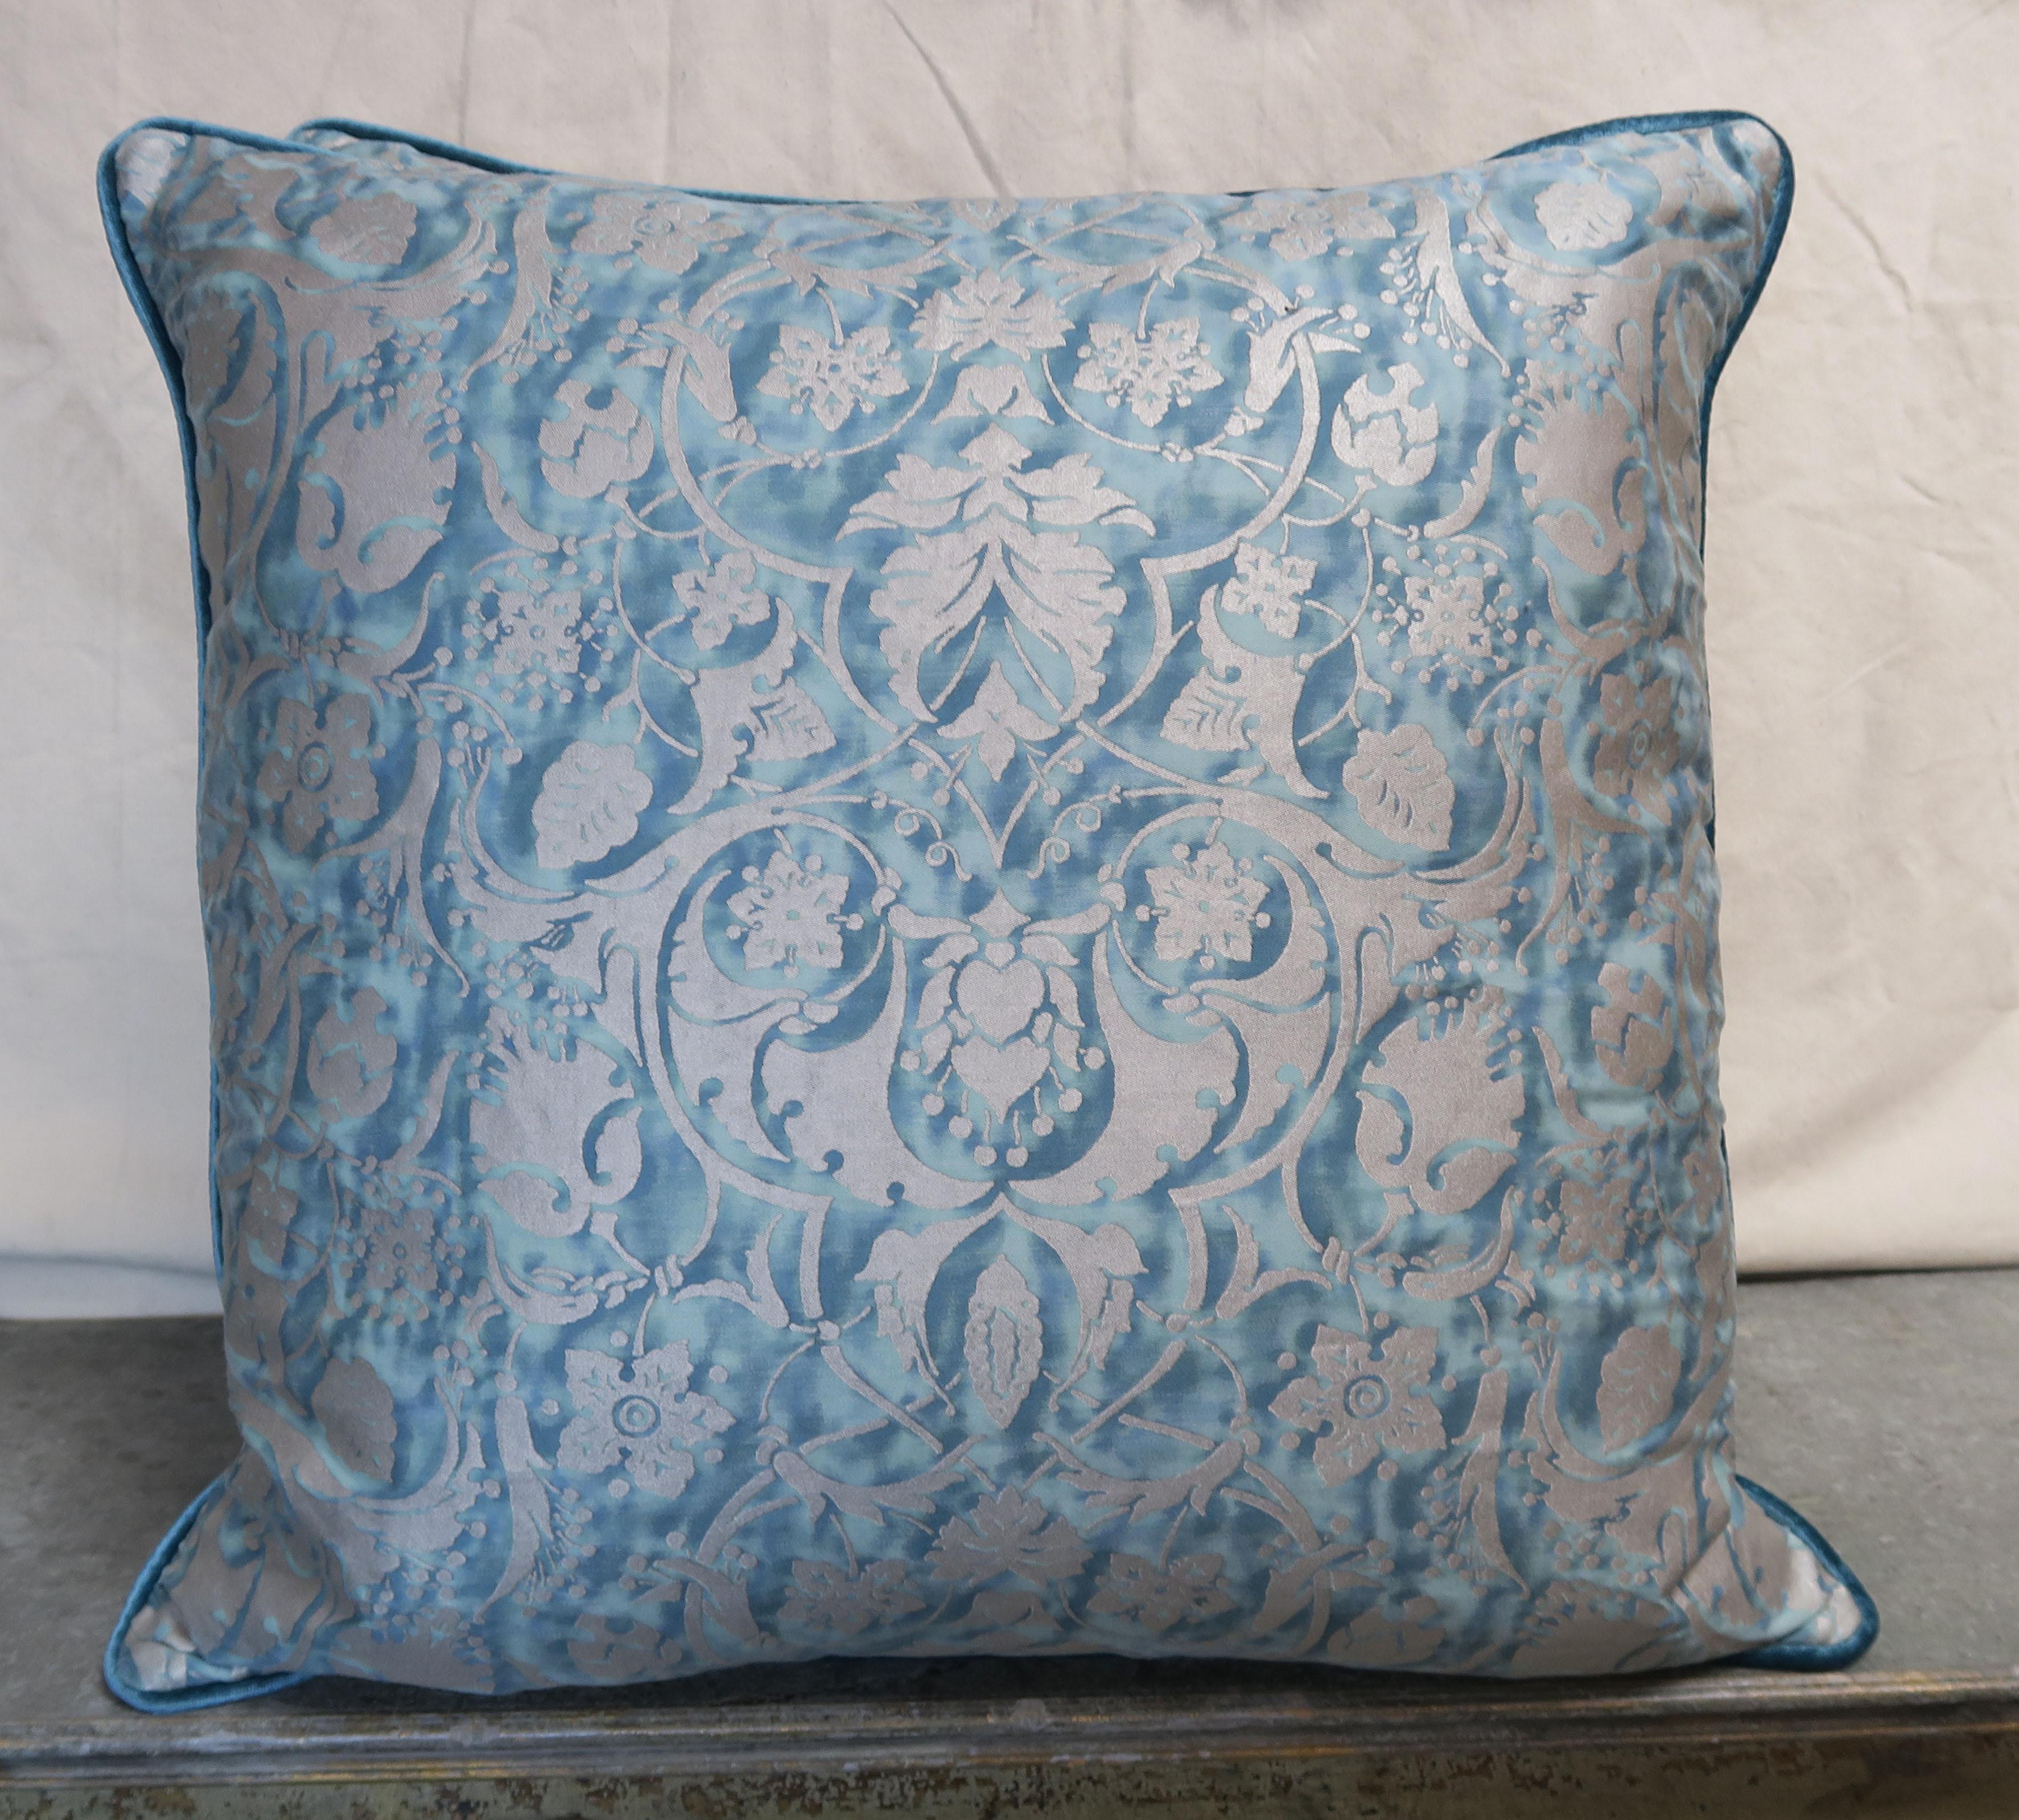 Pair of custom pillows made with Persepolis patterned Fortuny textile fronts in blue/green and silvery gold. Striking blue linen velvet backs with self cord detail. Down inserts, sewn closed.